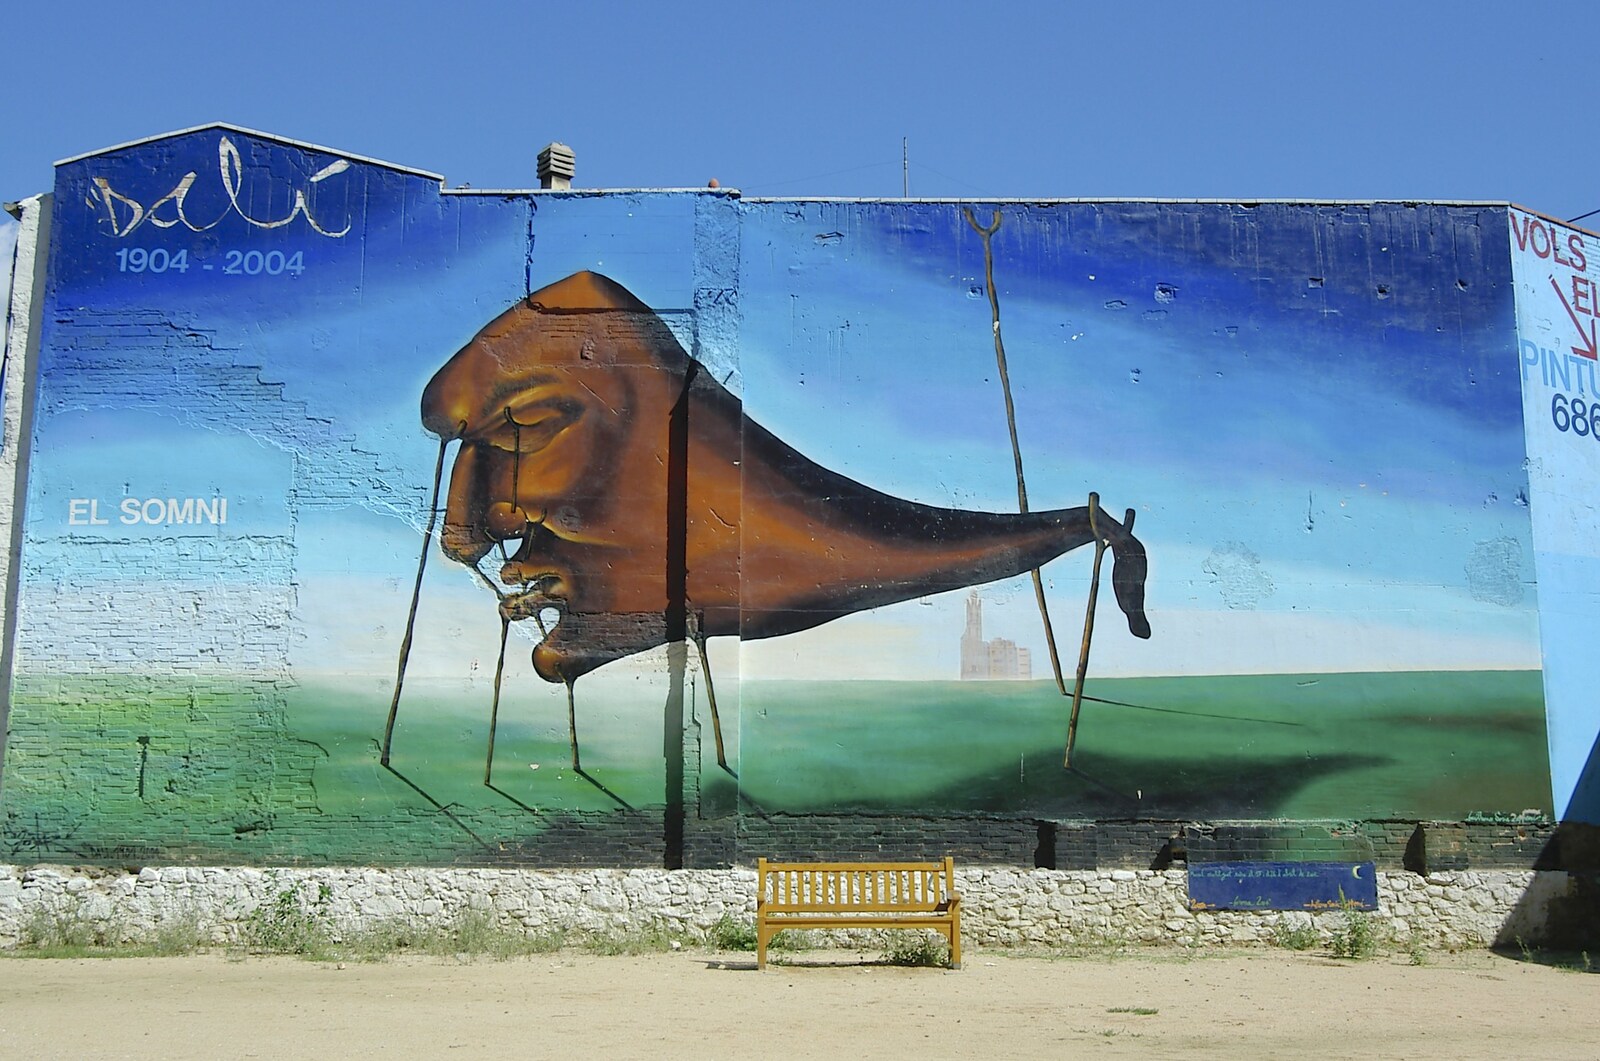 A Dali-esque mural on a derelict wall from Girona, Catalunya, Spain - 17th September 2006